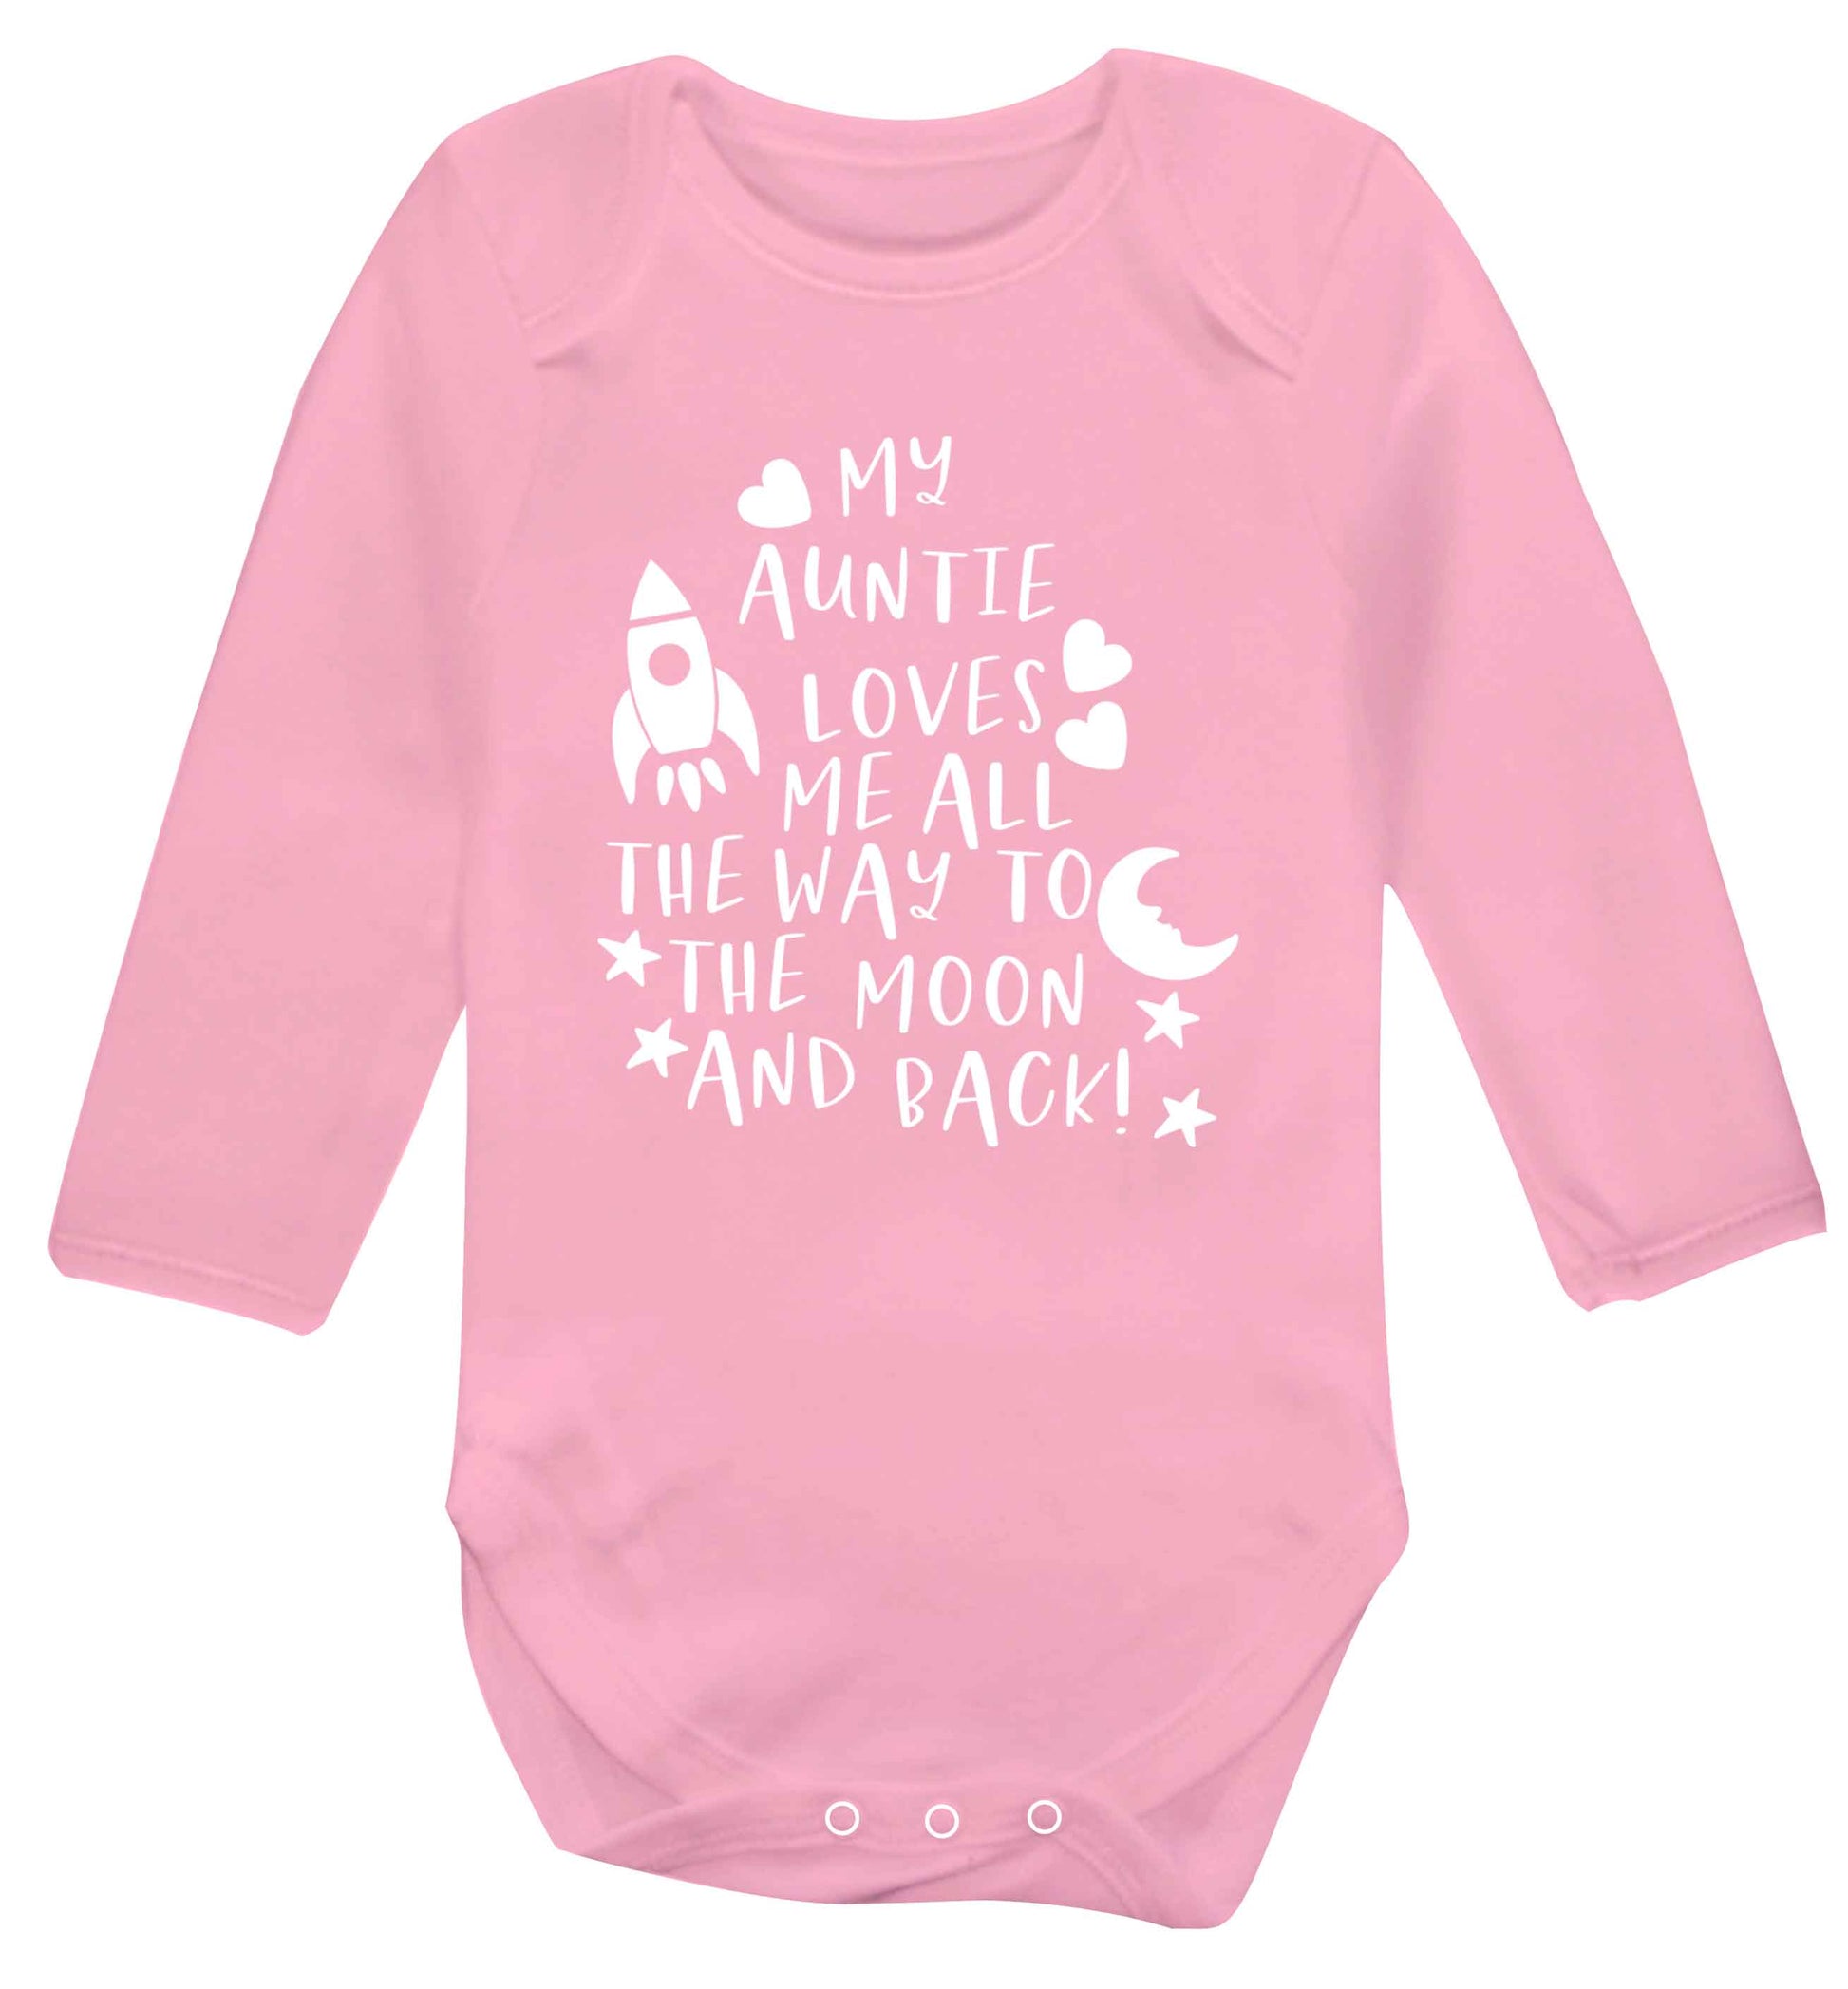 My auntie loves me all the way to the moon and back Baby Vest long sleeved pale pink 6-12 months